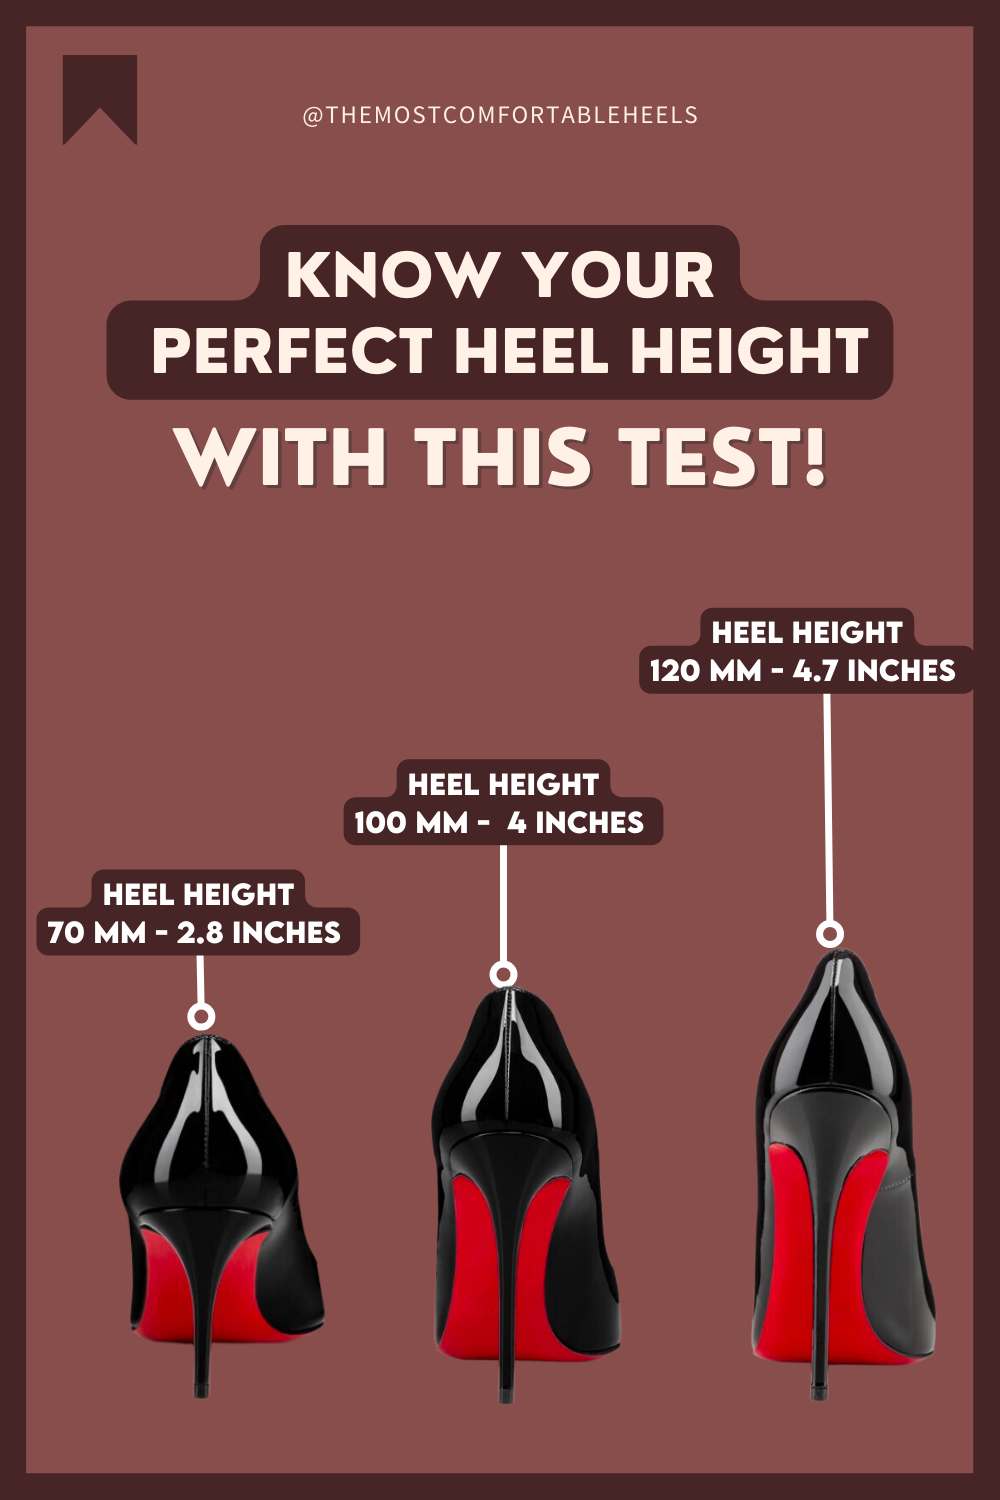 The 25 Most Comfortable Heels and Tips for Wearing Them | Who What Wear